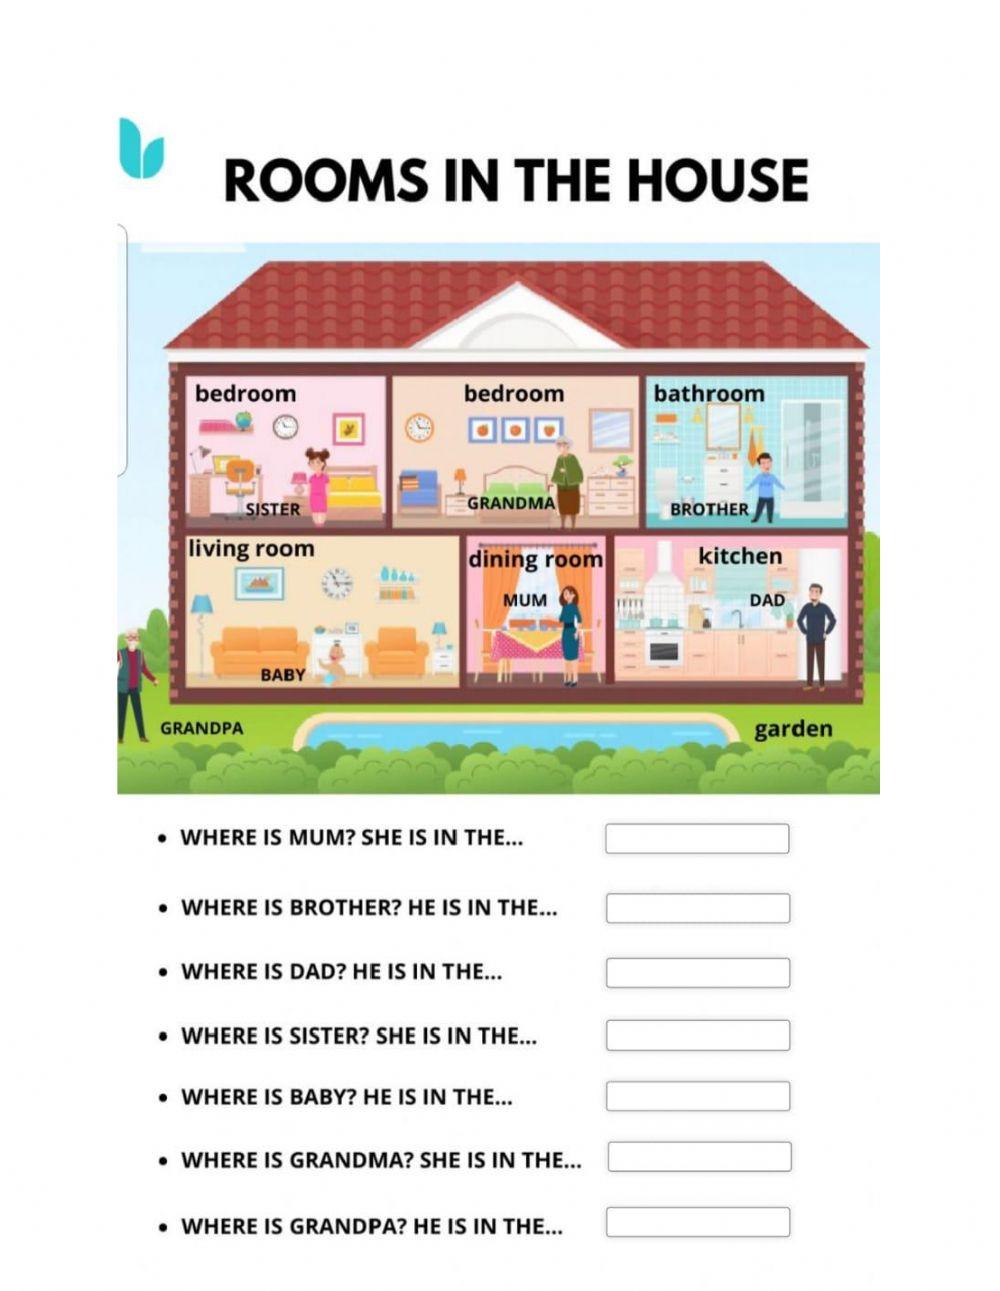 Rooms and family